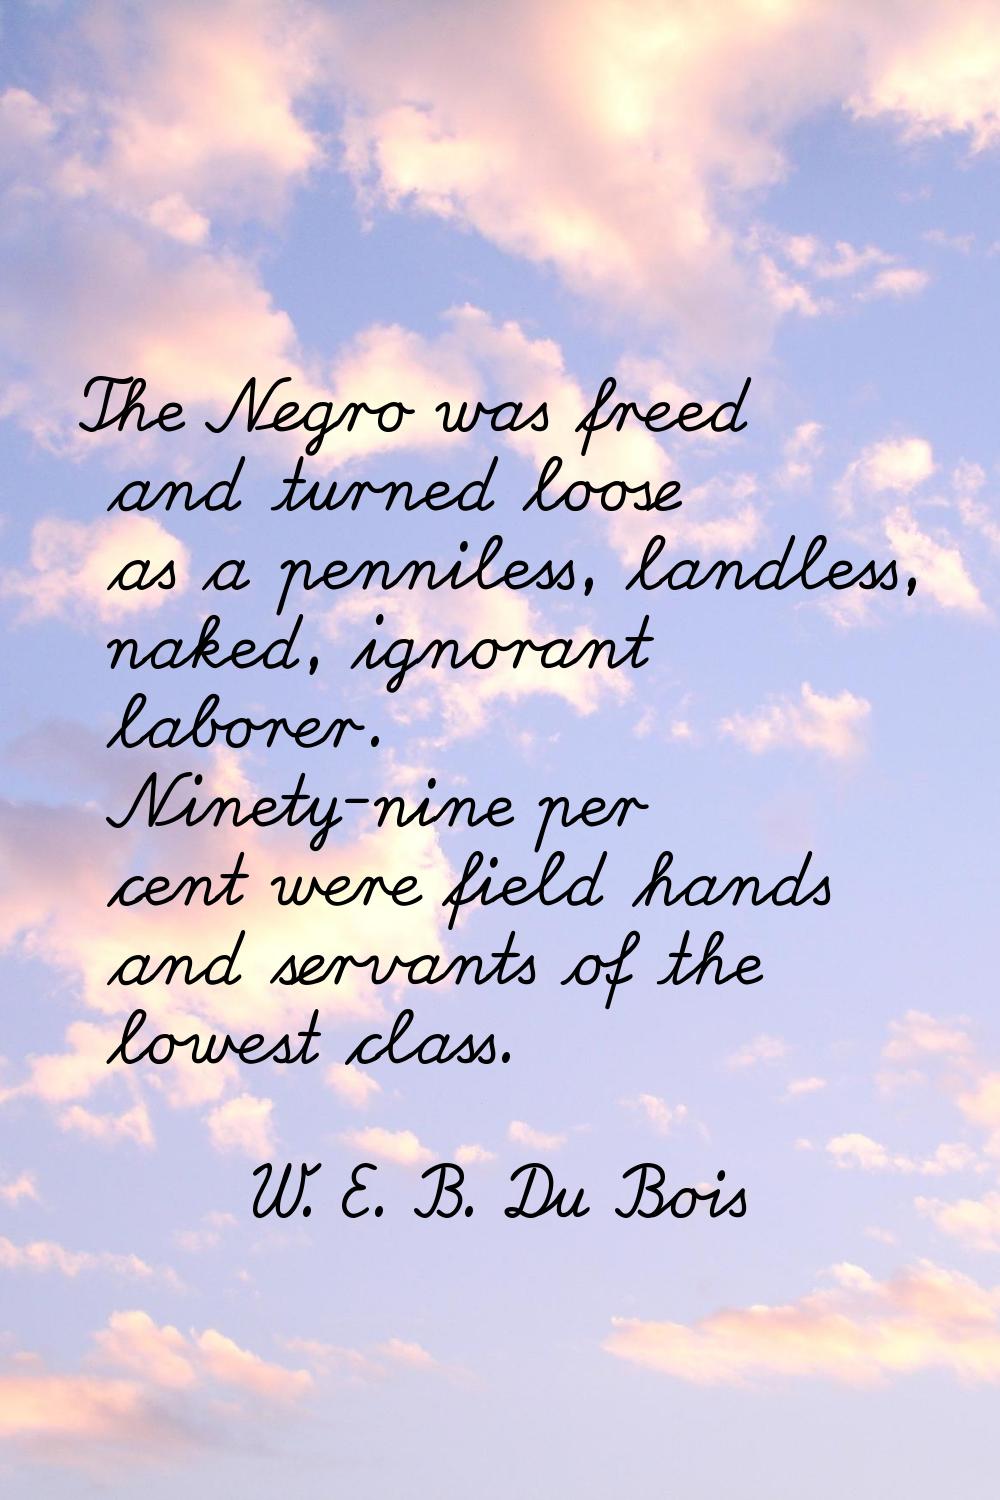 The Negro was freed and turned loose as a penniless, landless, naked, ignorant laborer. Ninety-nine